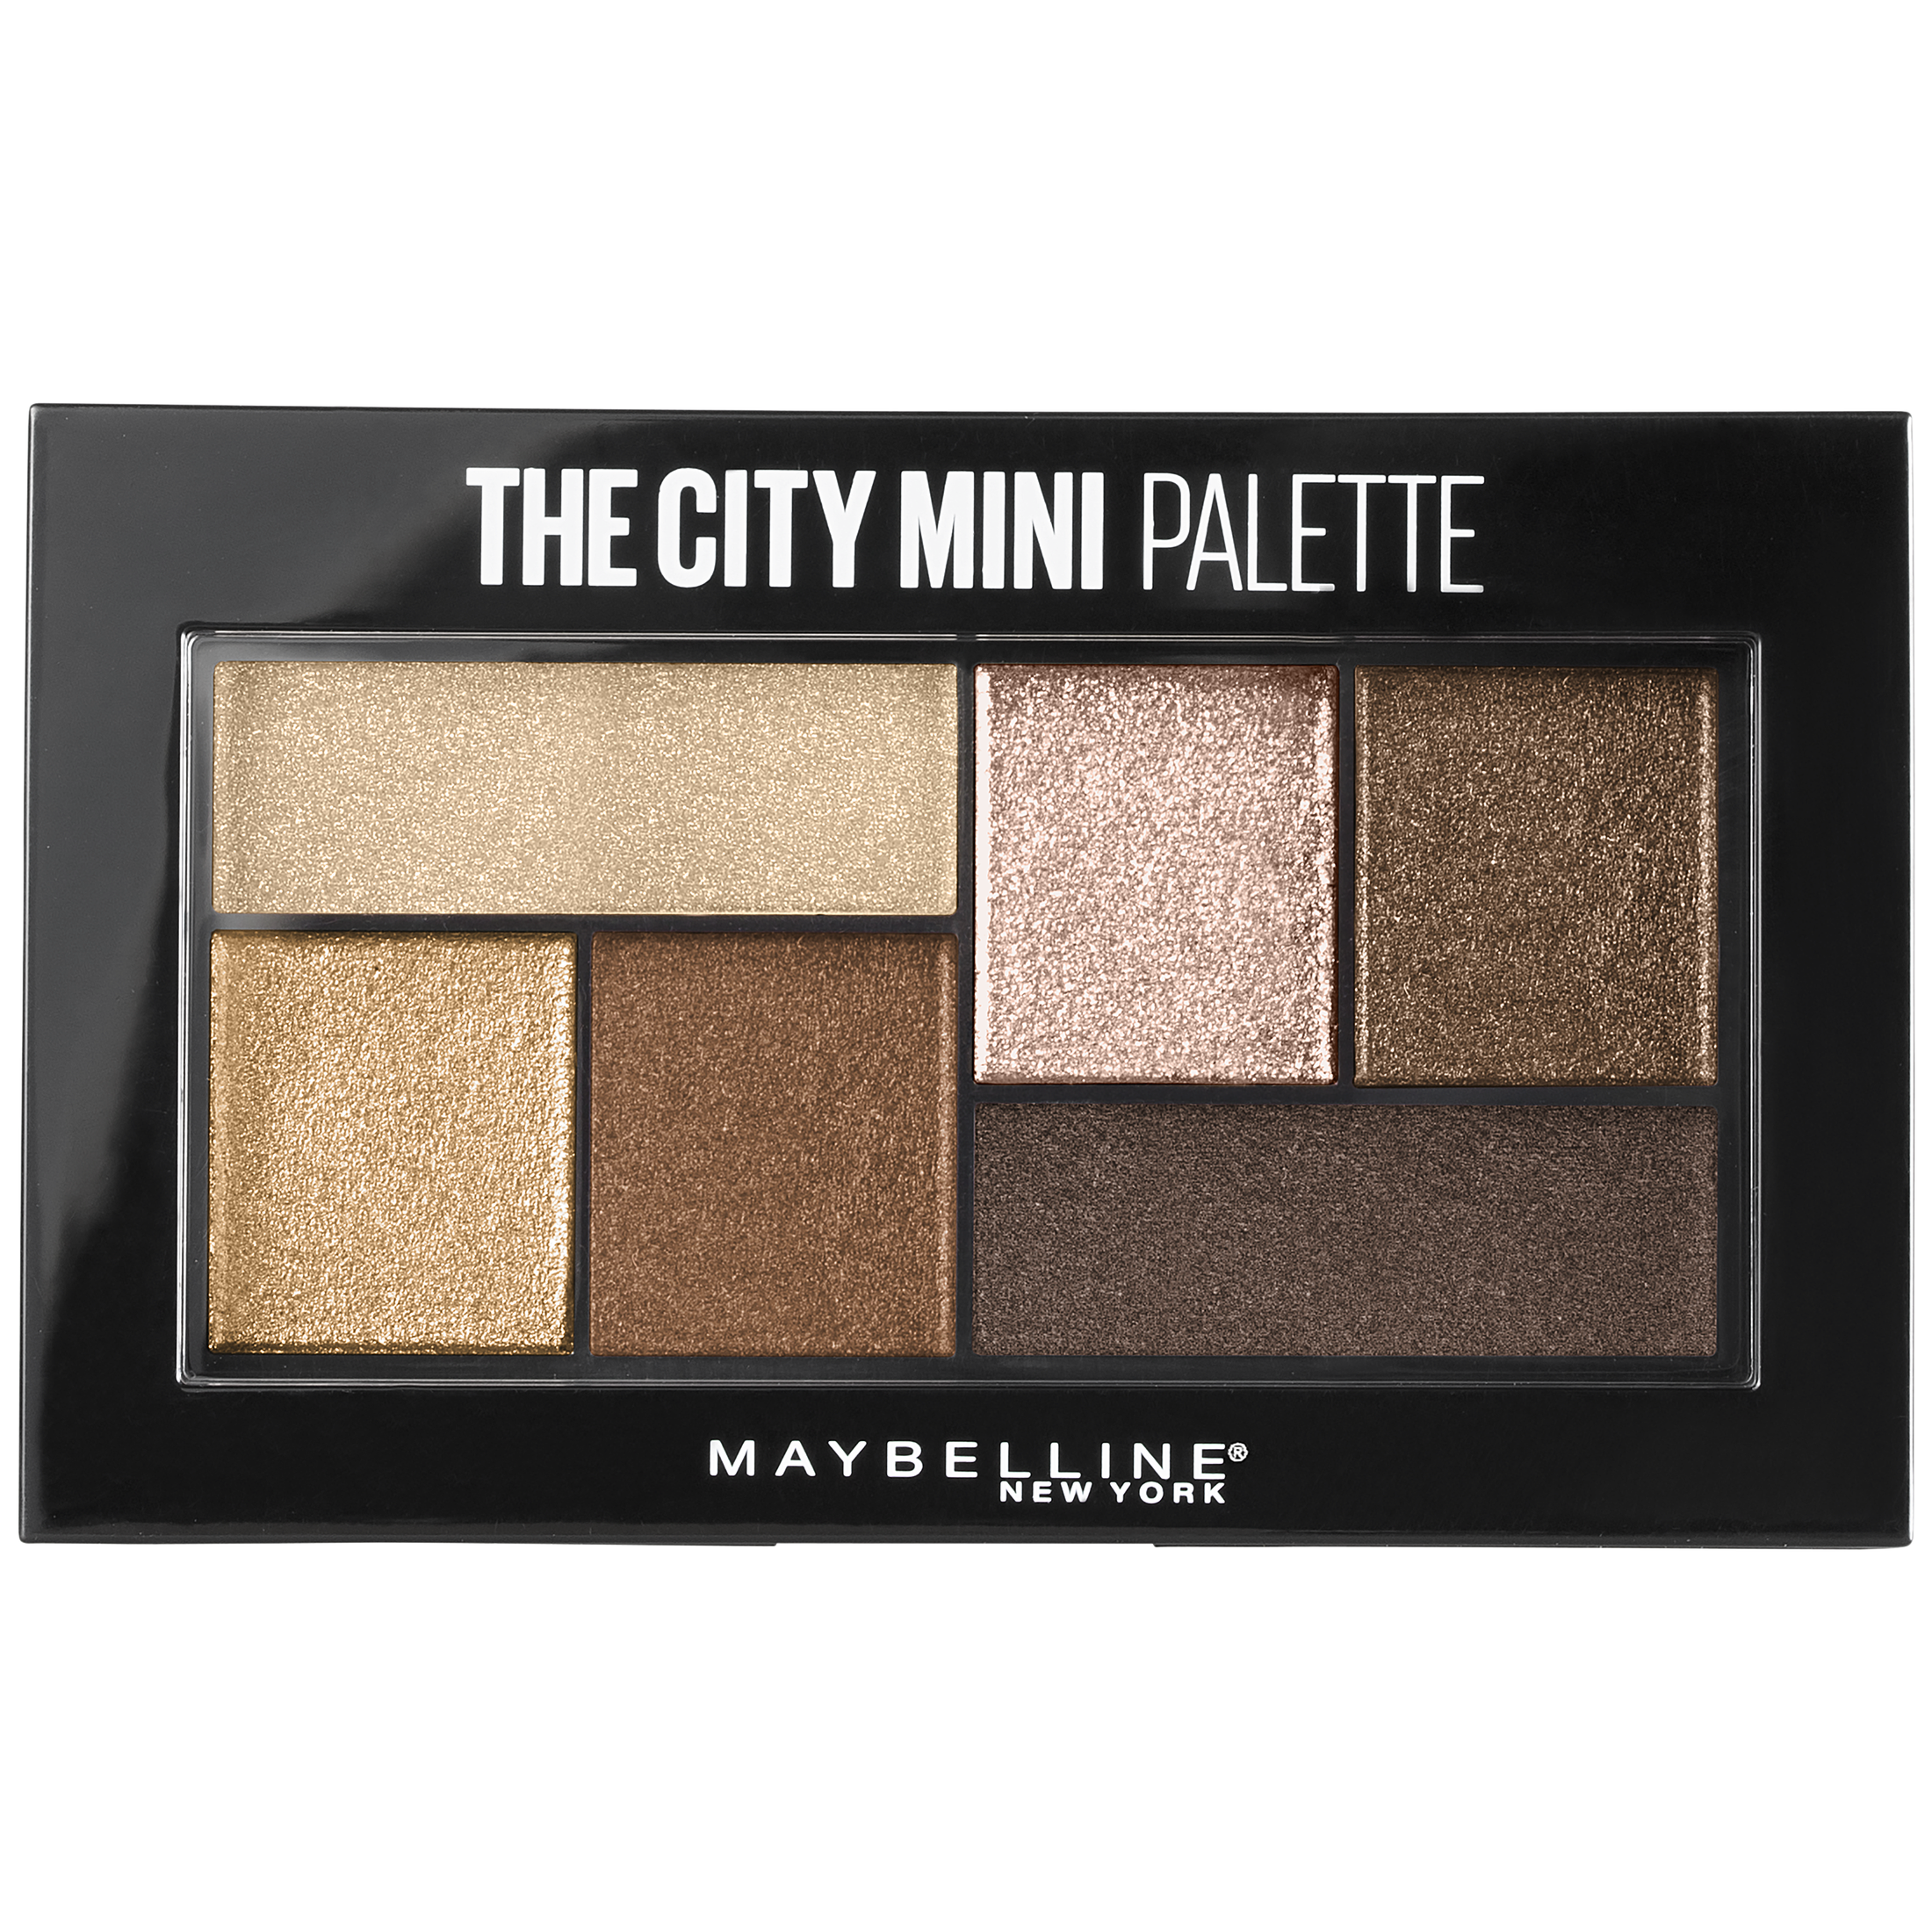 Maybelline The City Mini Eyeshadow Palette Makeup, Rooftop Bronzes - image 1 of 10